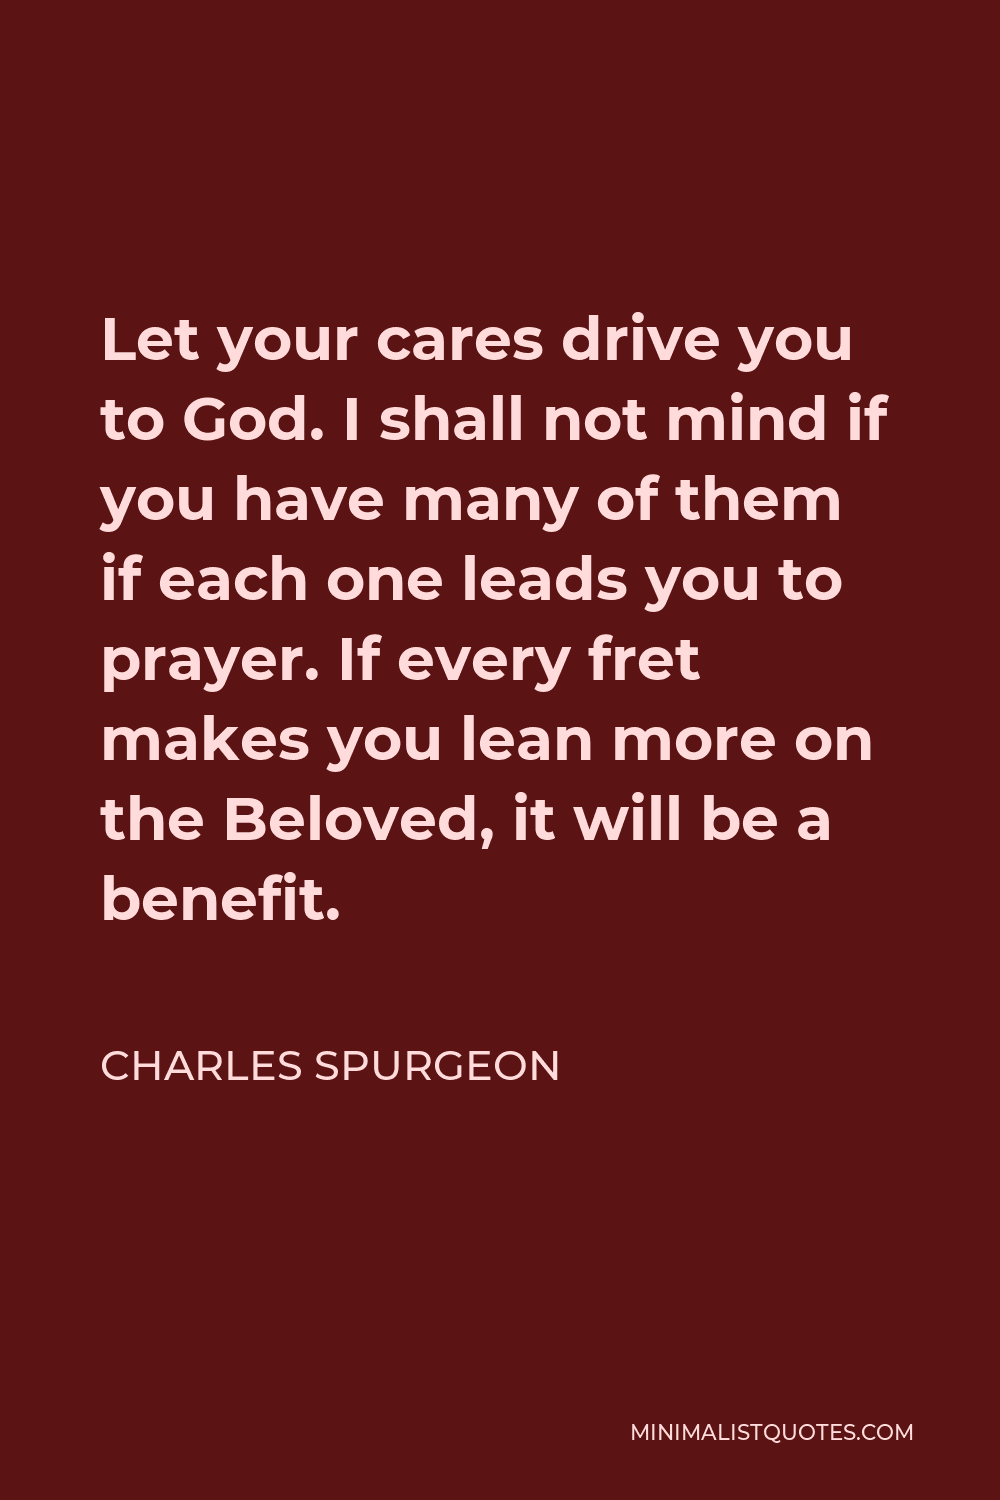 Charles Spurgeon Quote - Let your cares drive you to God. I shall not mind if you have many of them if each one leads you to prayer. If every fret makes you lean more on the Beloved, it will be a benefit.